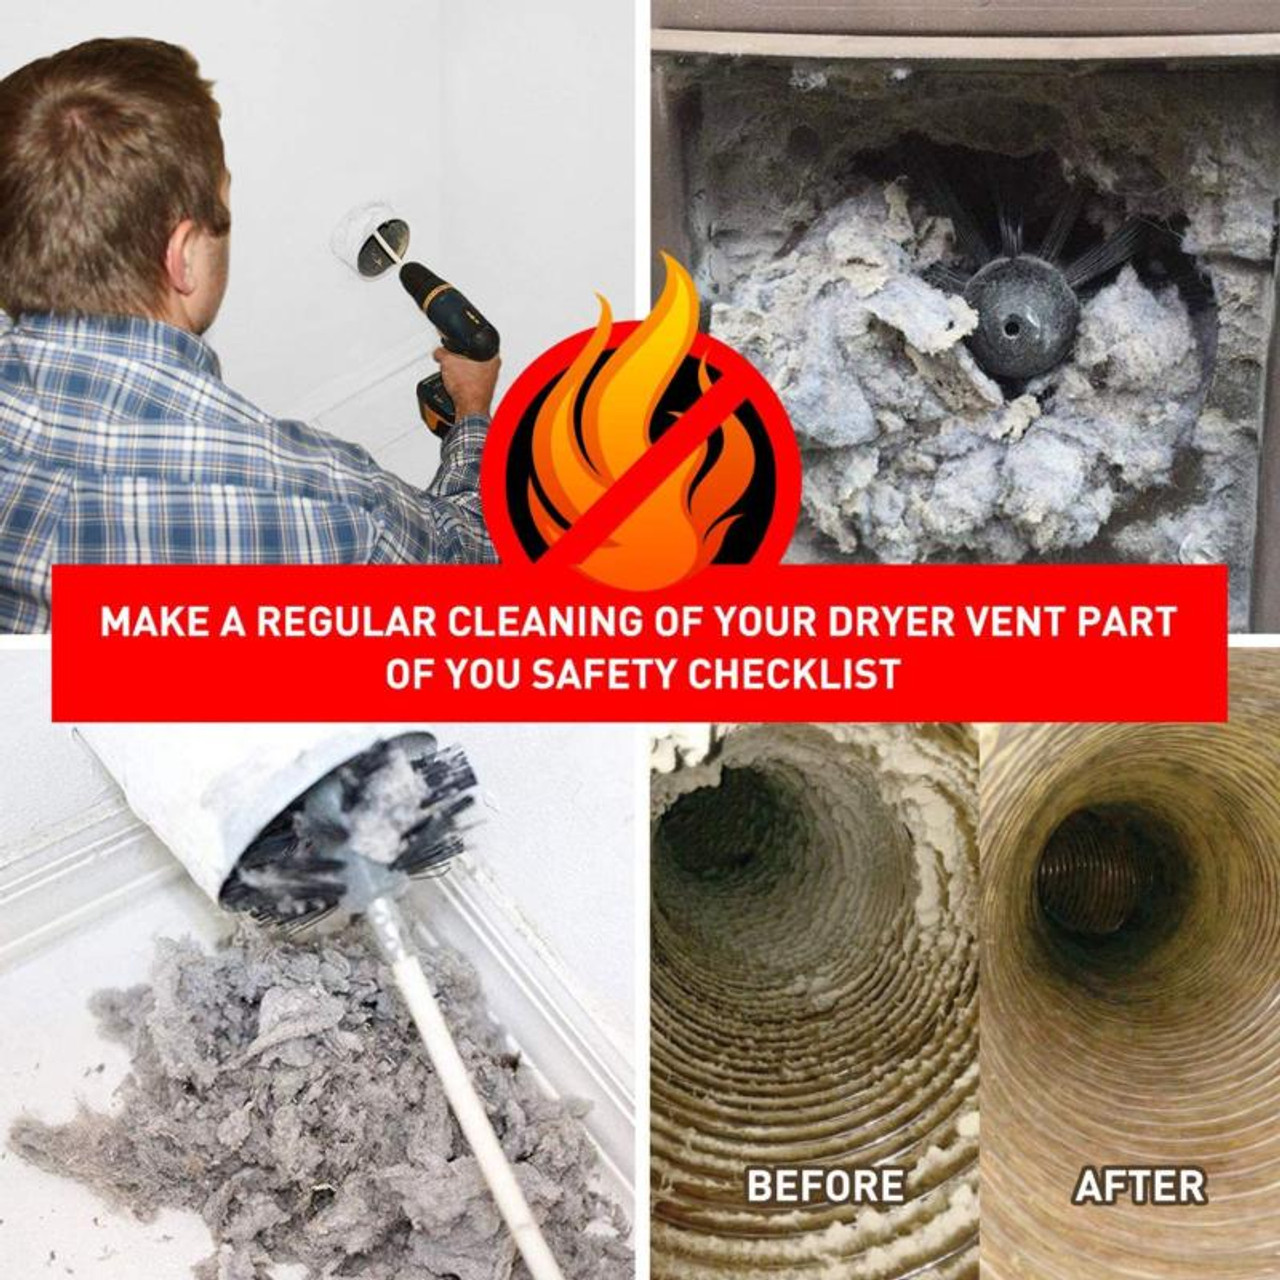 https://cdn11.bigcommerce.com/s-zrh8tkpr8d/images/stencil/1280x1280/products/7607/32675/15-feet-dryer-vent-cleaner-kit-dryer-vent-cleaning-brush-lint-remover__95198.1665668187.jpg?c=2&imbypass=on